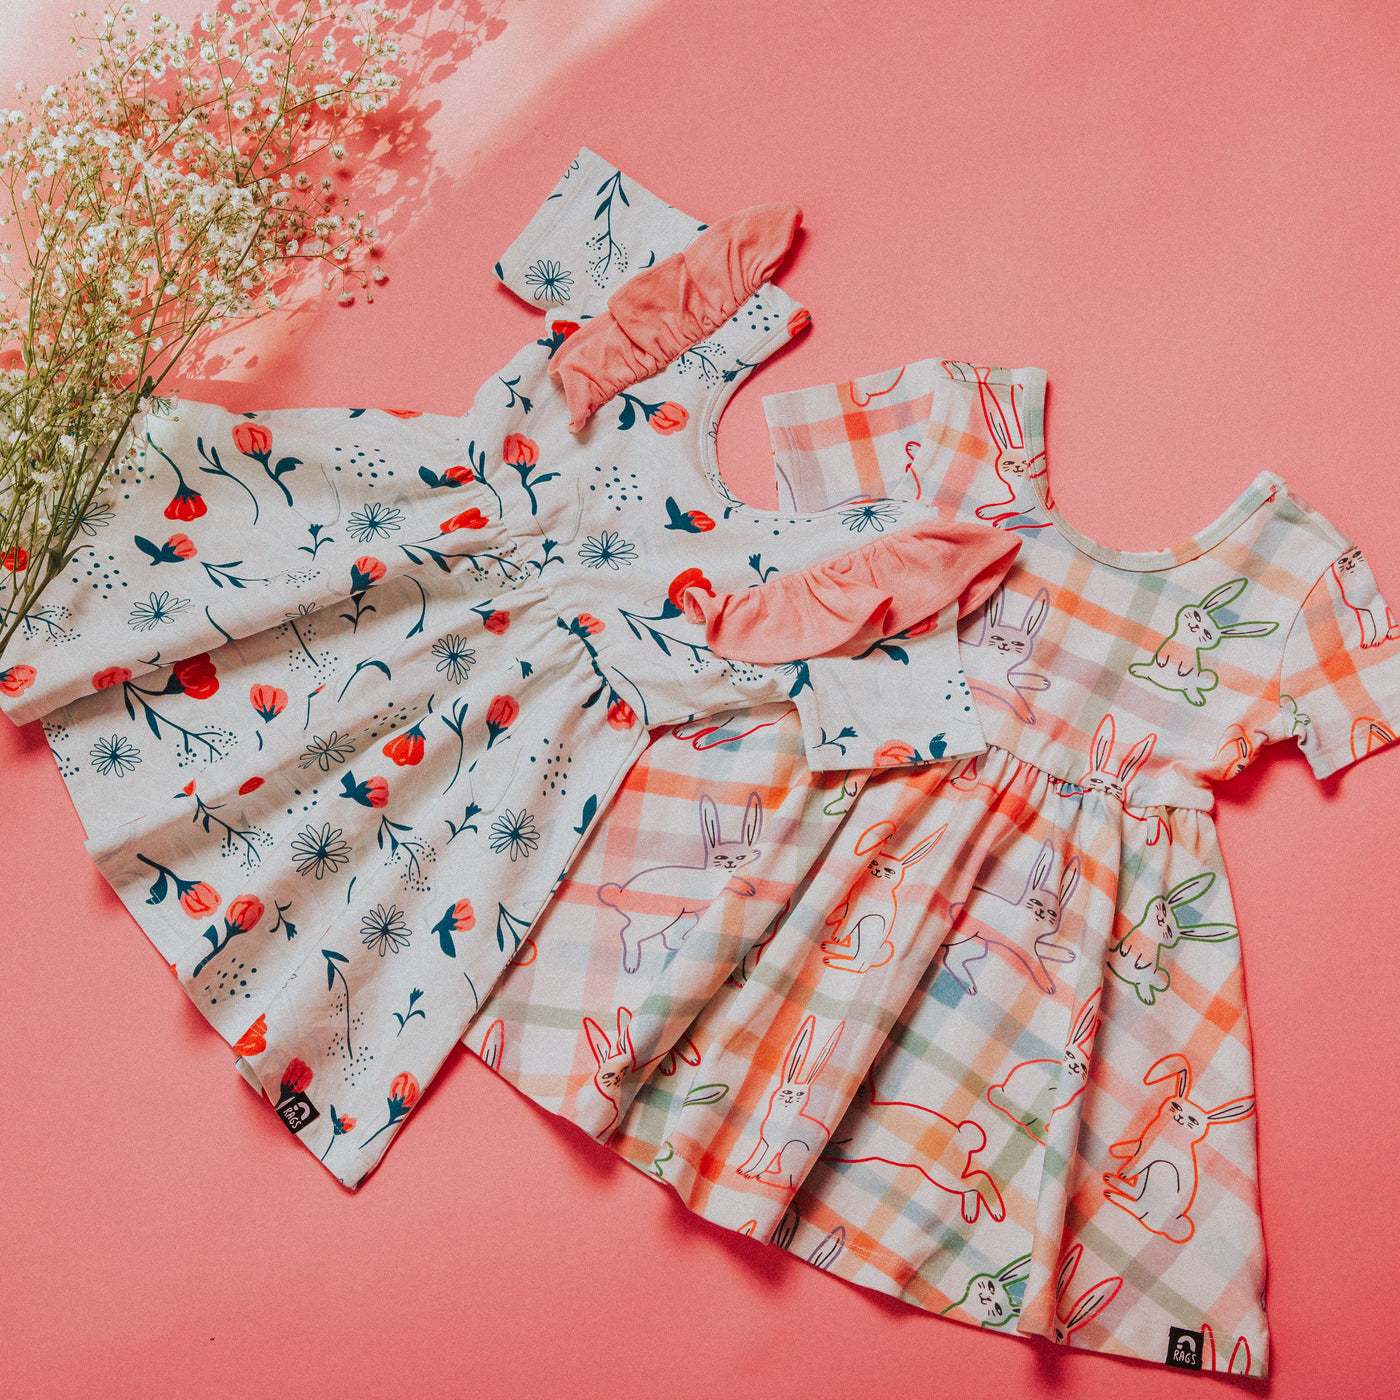 Short Sleeve Swing Dress - 'Bunny Hop' - RAGS Easter Collection (Final Sale)